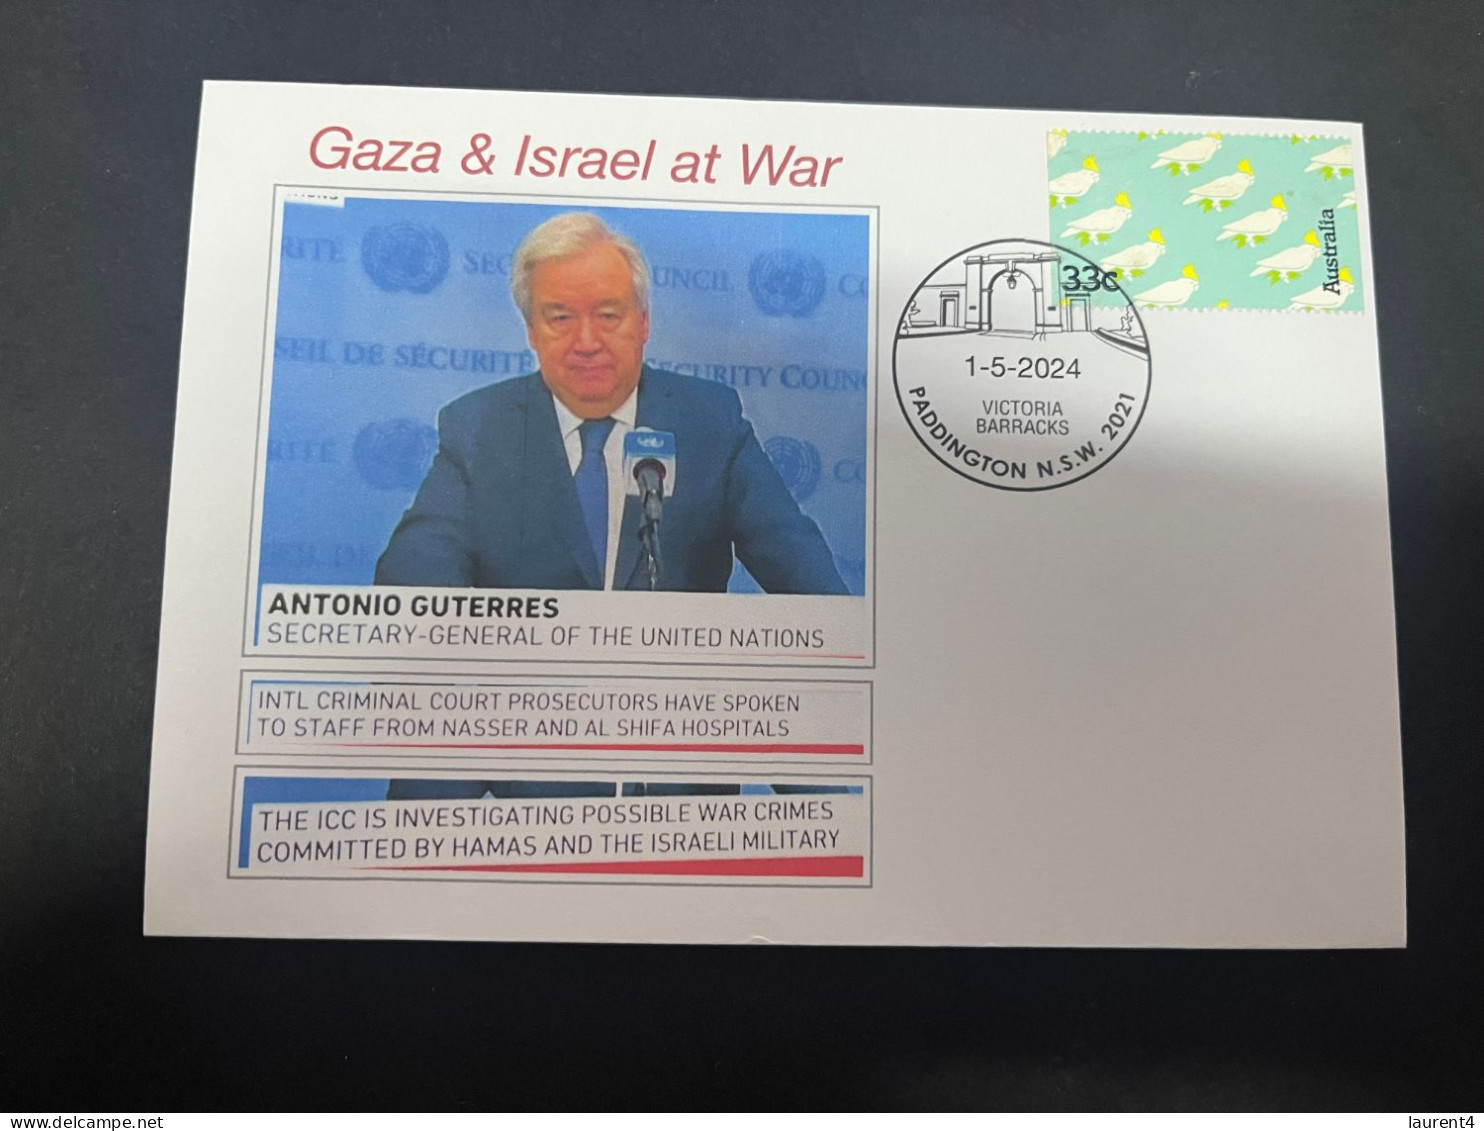 2-5-2024 (3 Z 32) GAZA War - A. Guterres Announced Possible Int. Criminal Court Prosecuton For Israel Leaders ? - Militaria